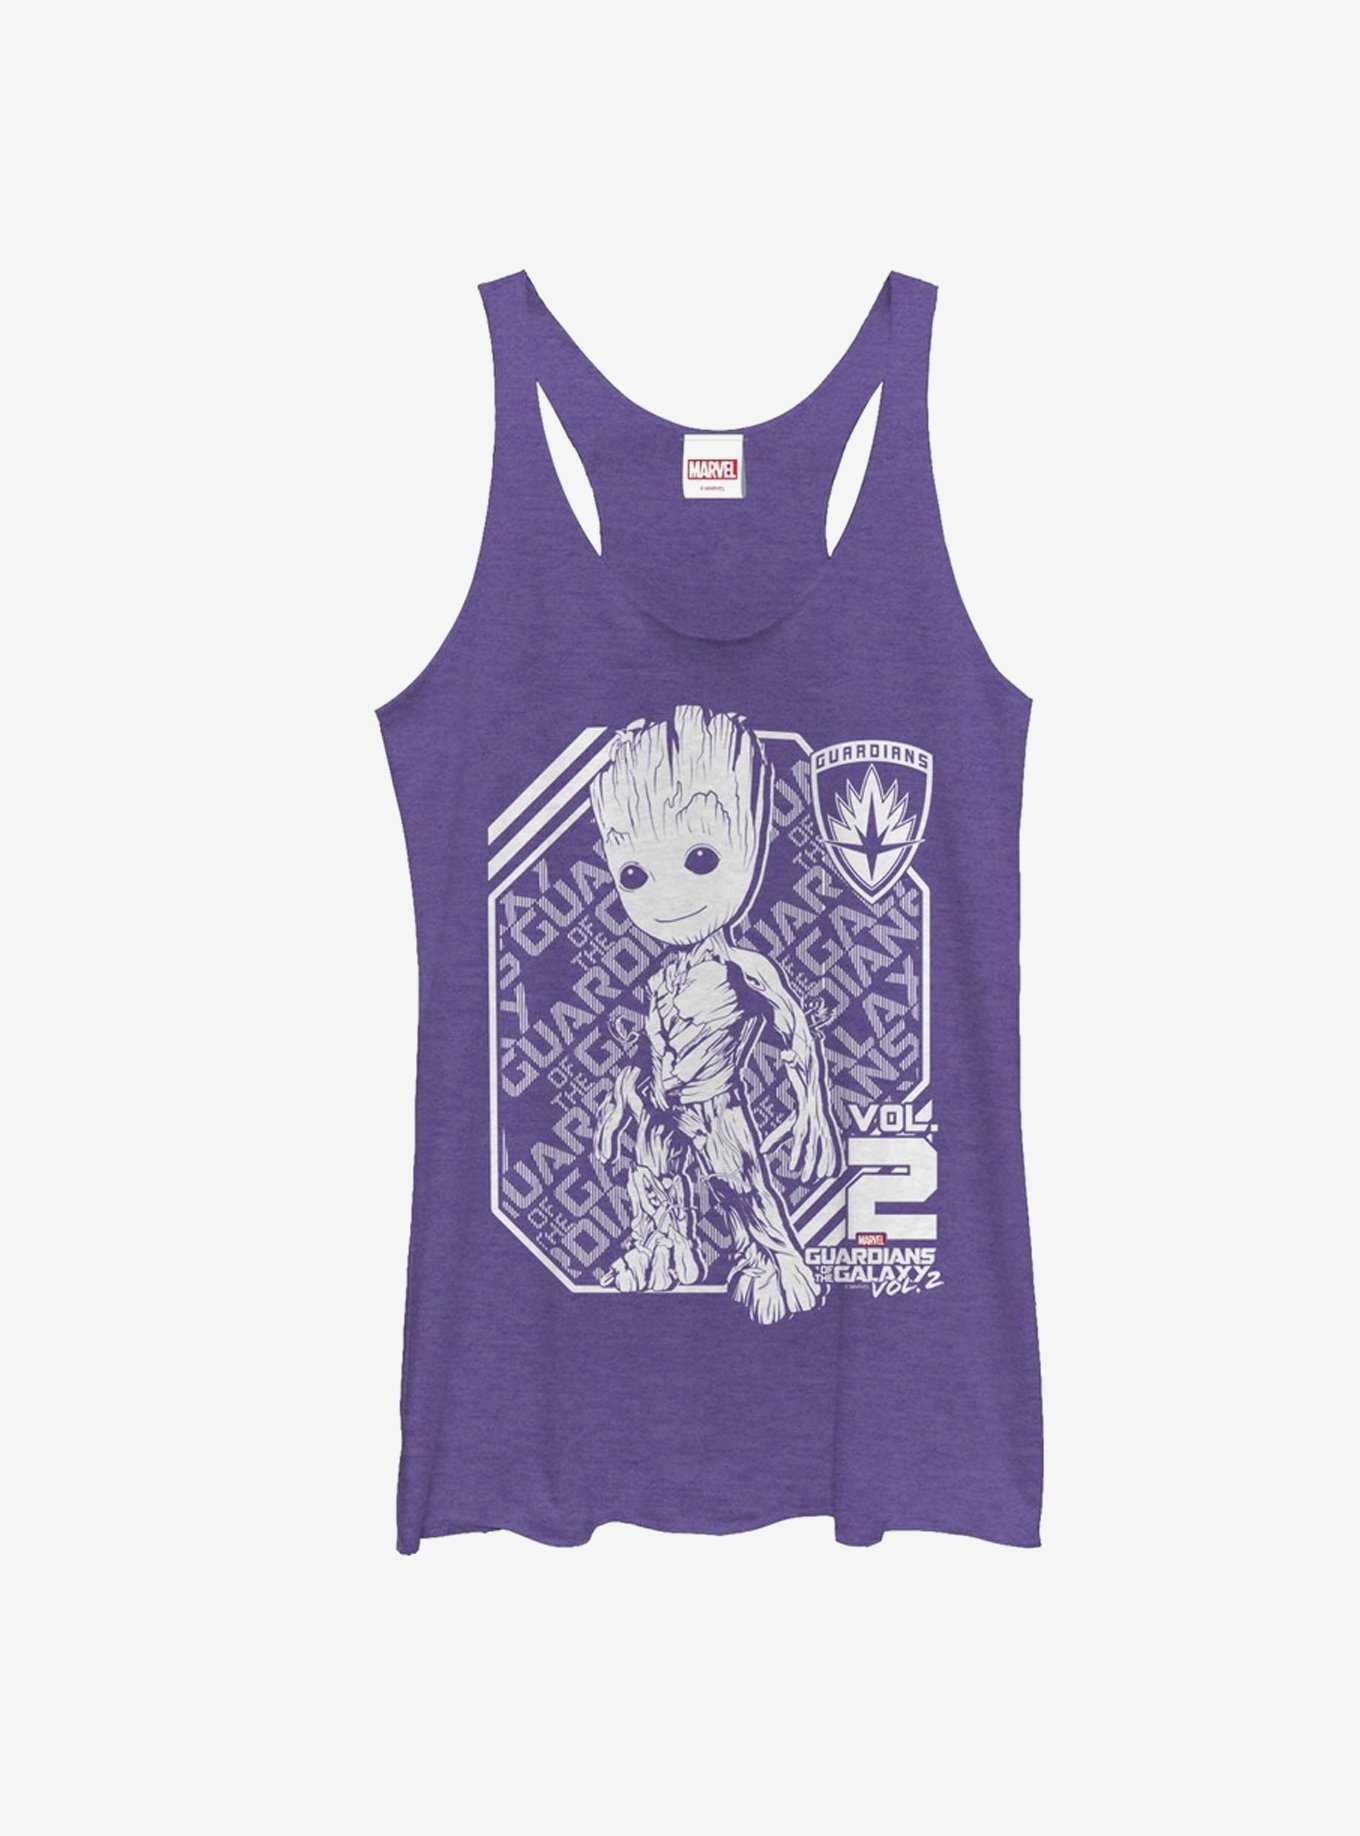 Guardians Of The Galaxy Guardians of Galaxy Vol. 2 Groot Athletic Girls Tanks, , hi-res